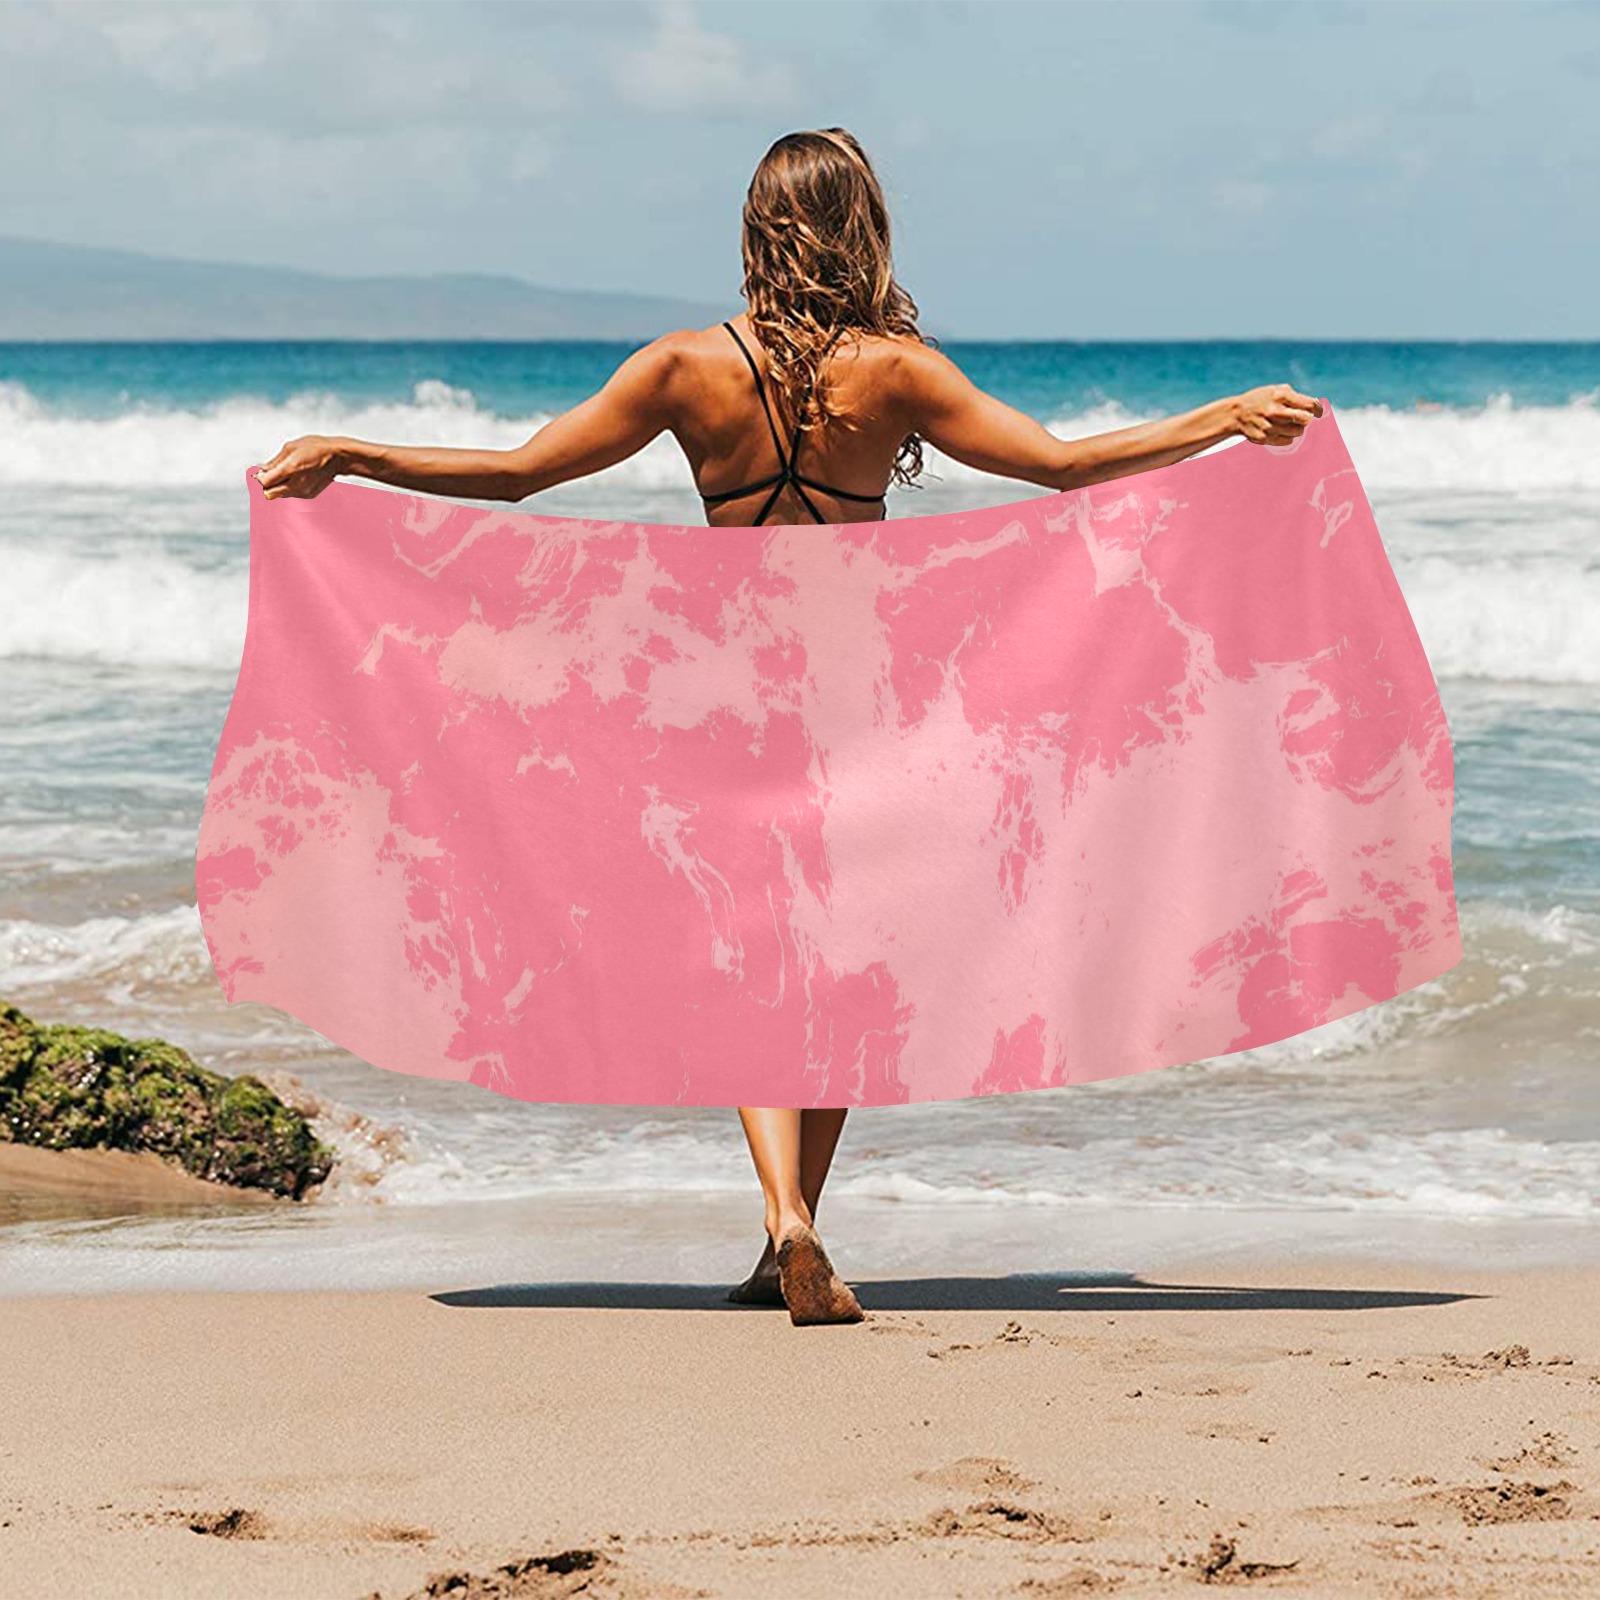 Pink Abstract Beach Towel 32"x 71"